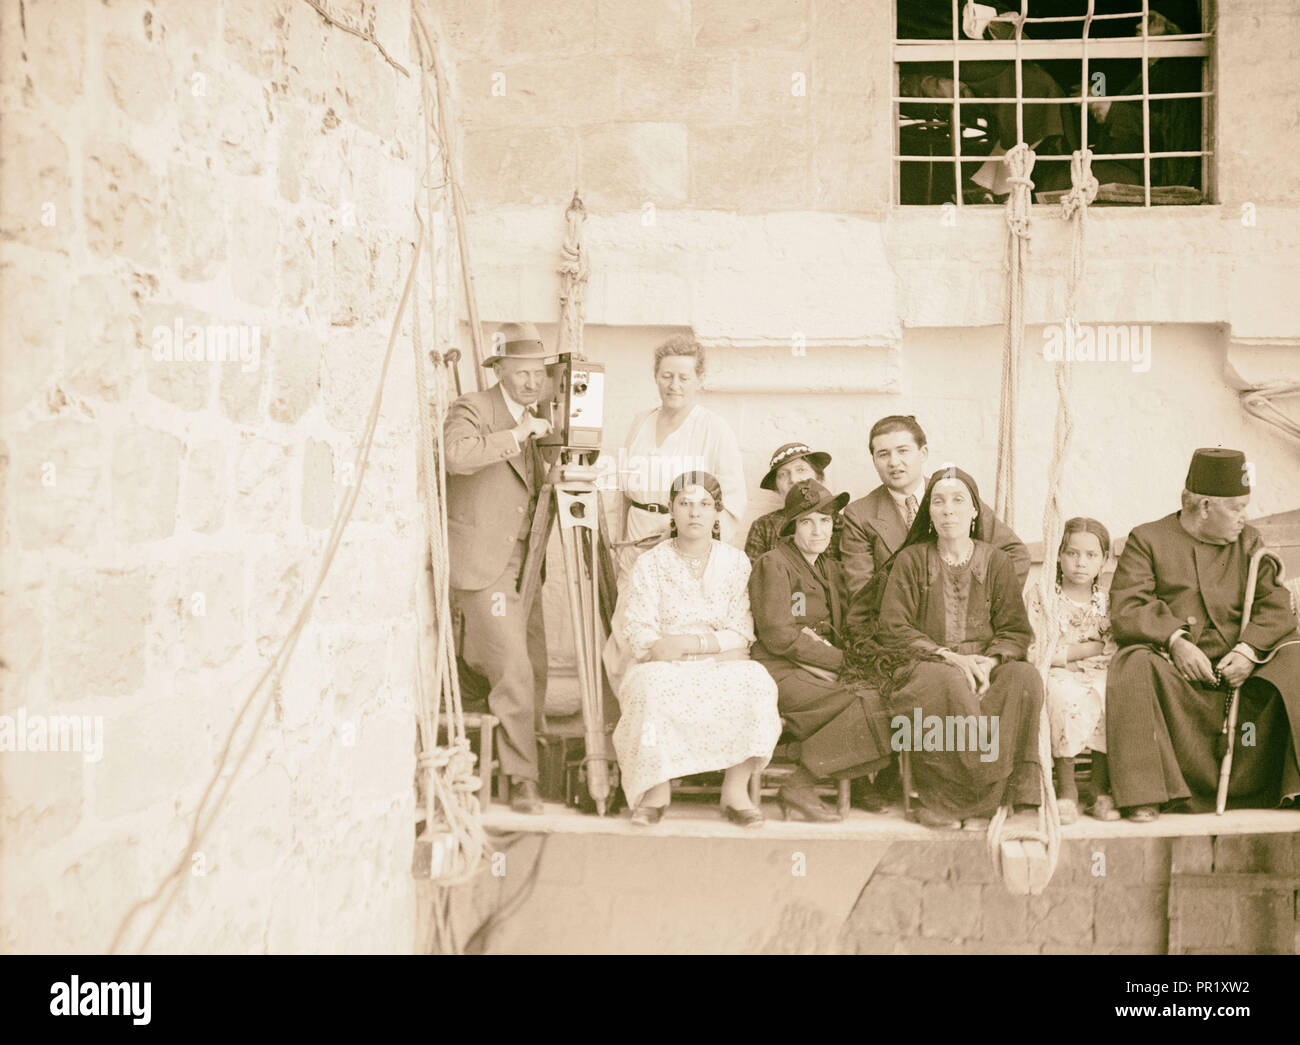 Eric and Edith Matson with movie camera, standing on platform suspended from building, with other people, Jerusalem?. 1925 Stock Photo